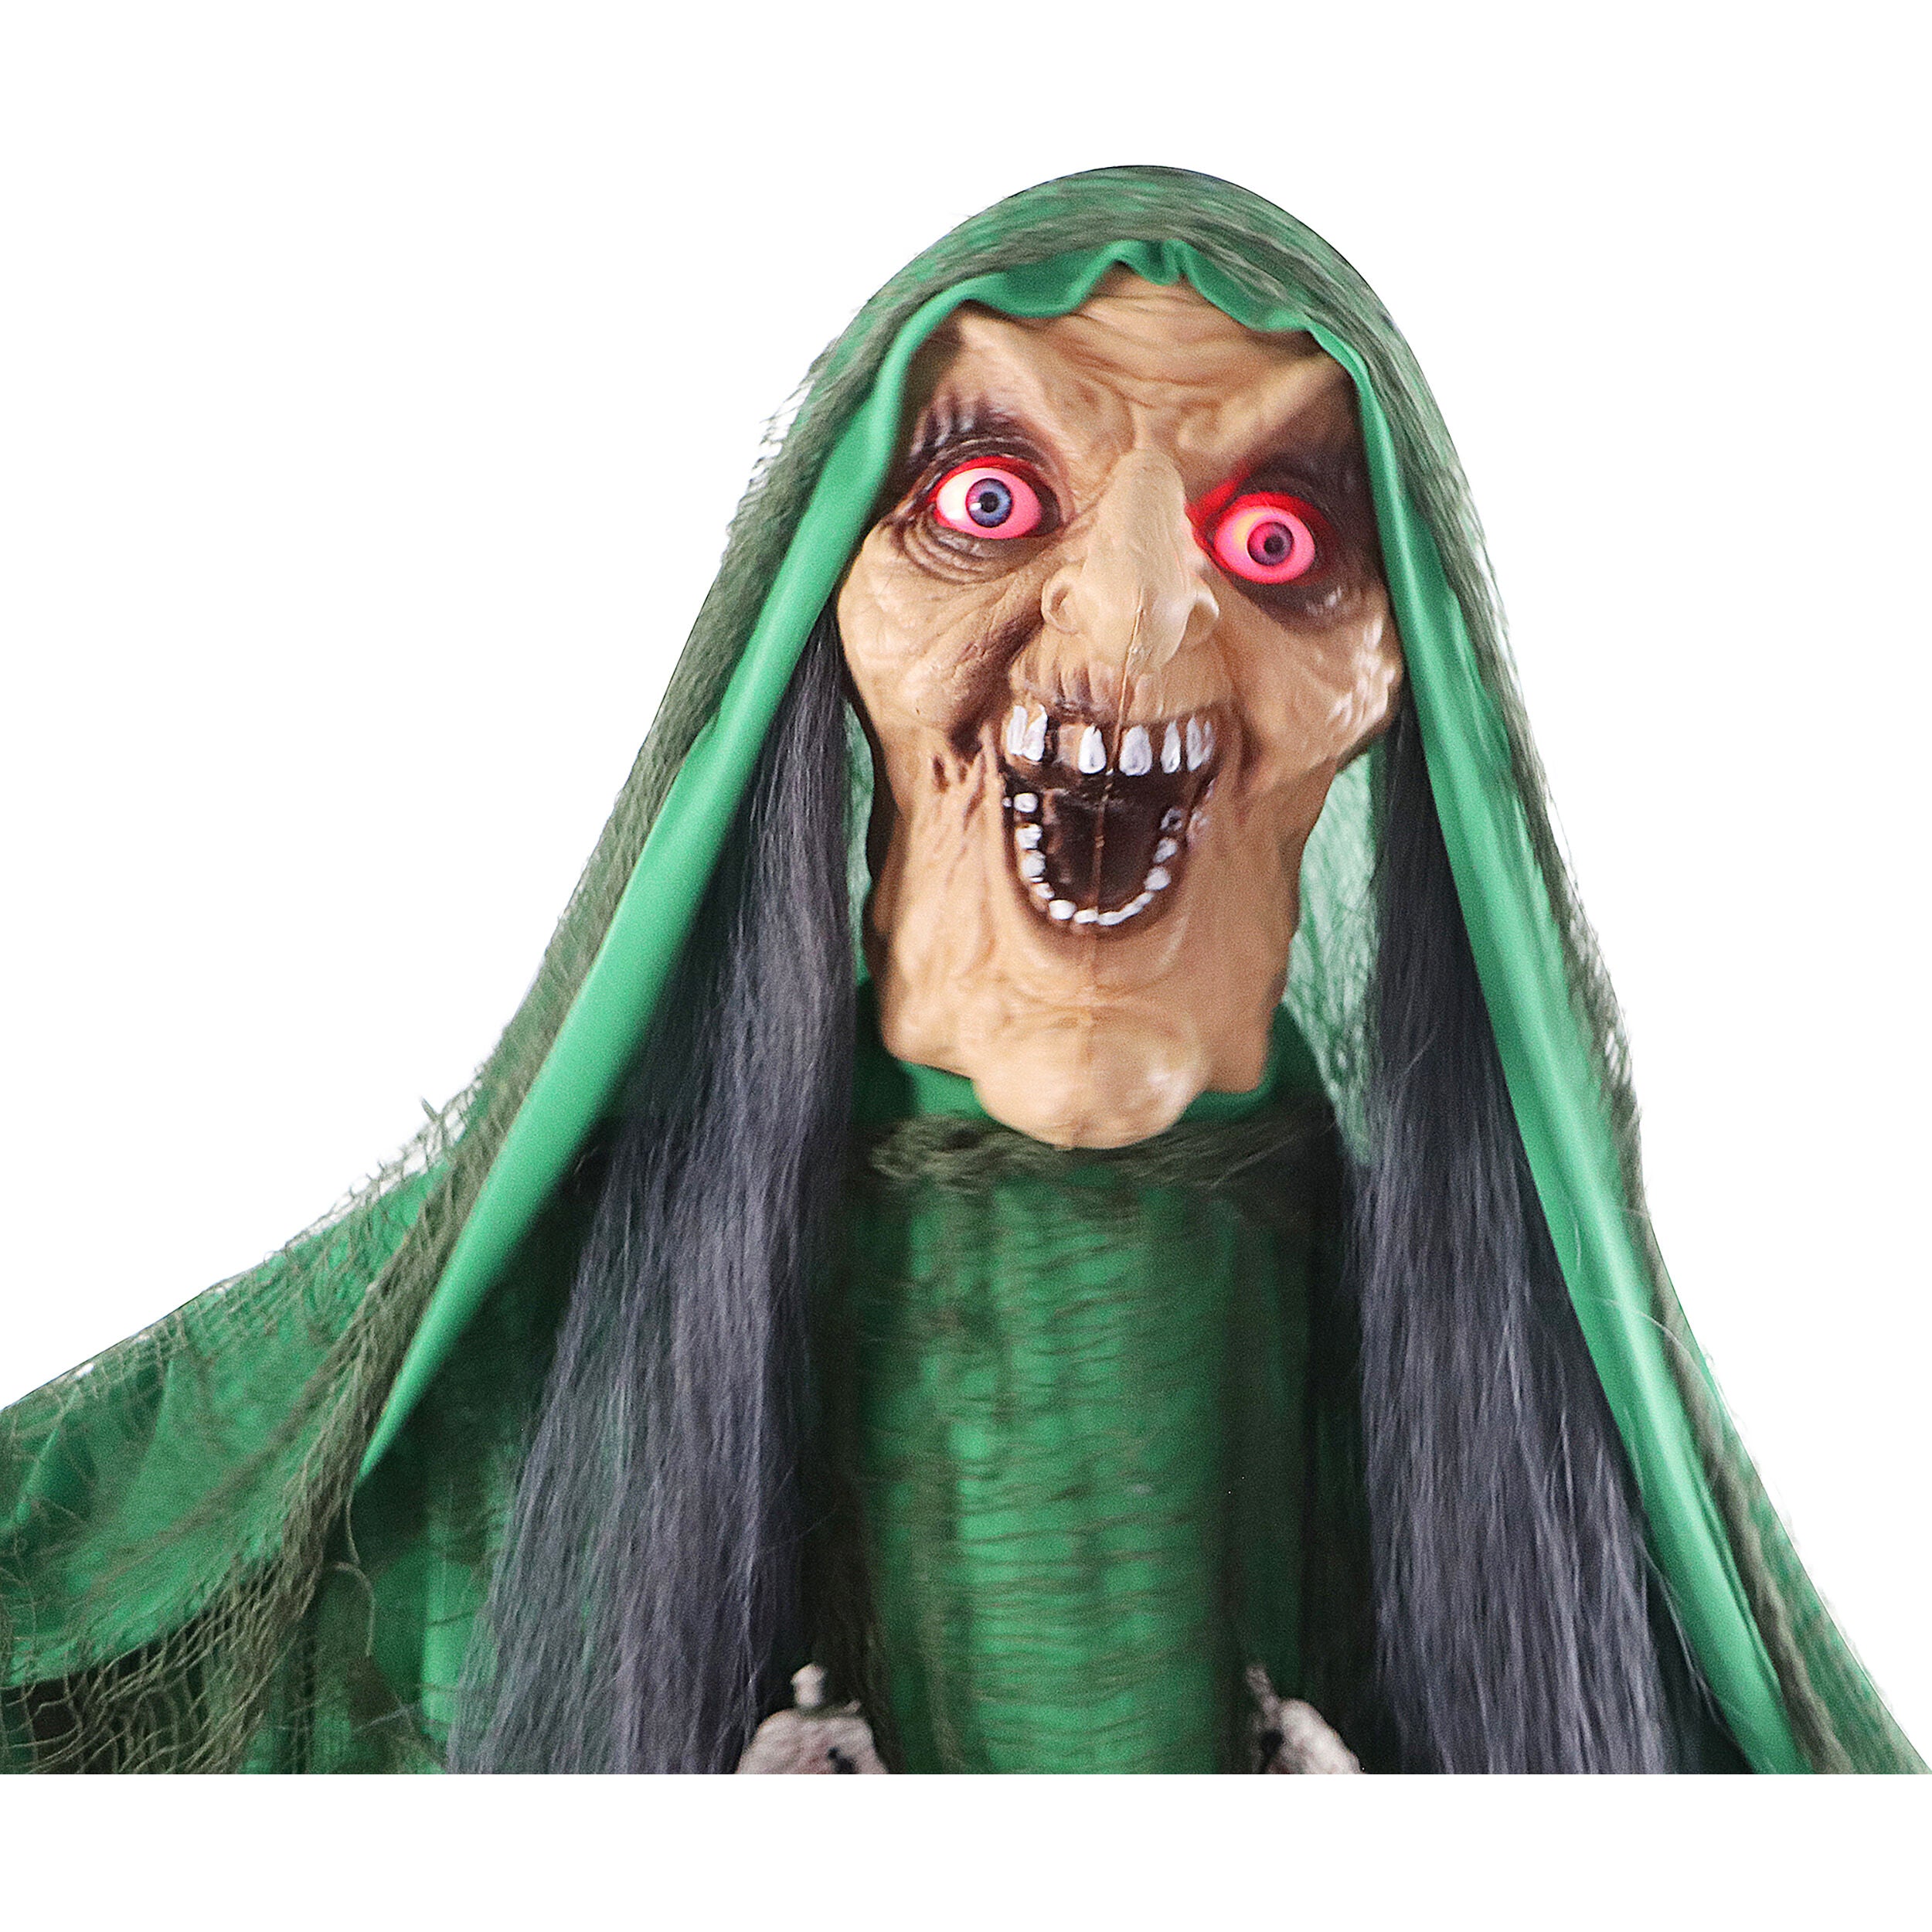 Haunted Hill Farm - Animatronic Shaking, Talking Voodoo Swamp Witch with Shrunken Skull Staff for Scary Halloween Decoration